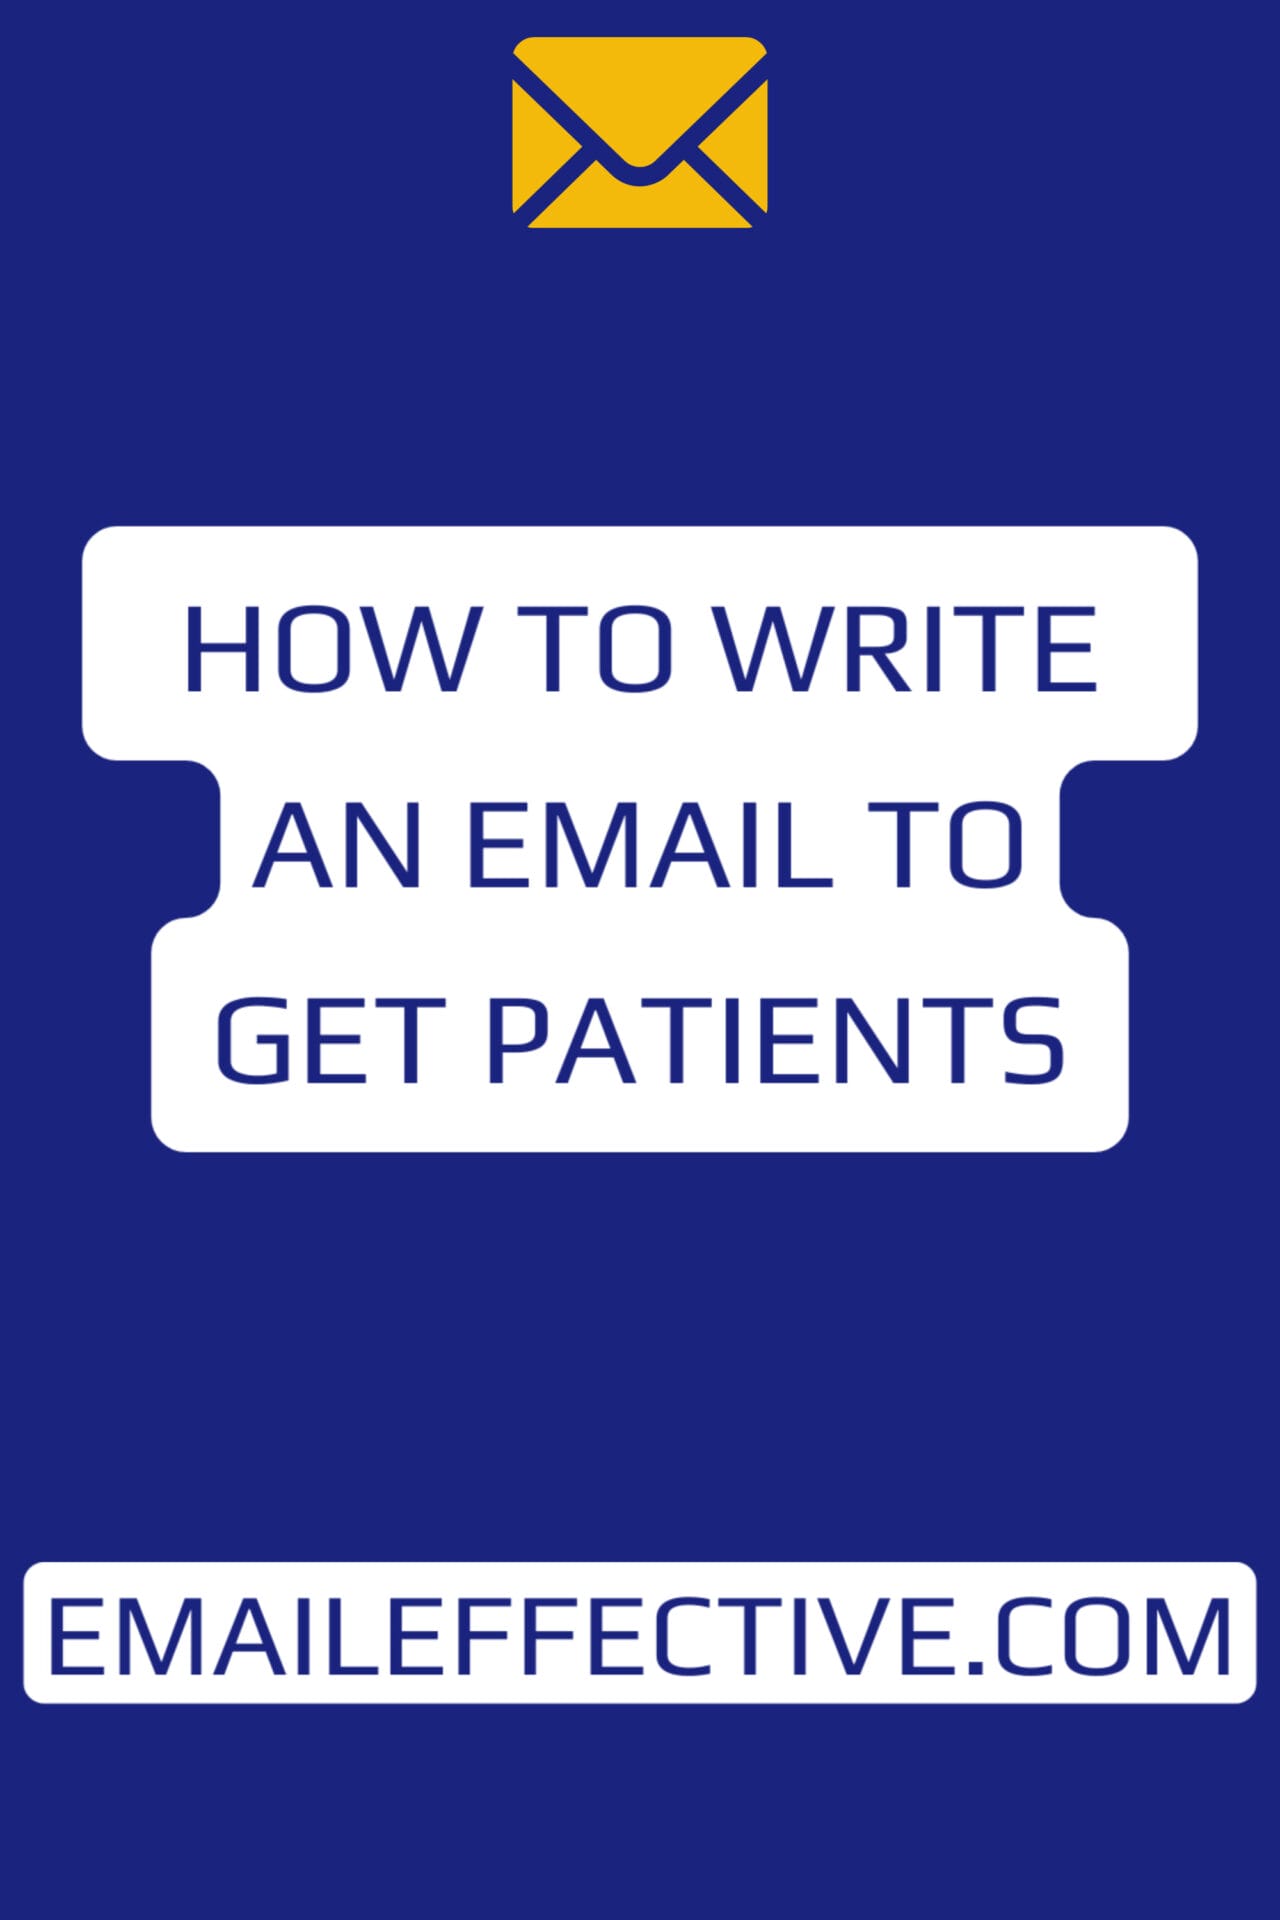 How To Write an Email To Get Patients